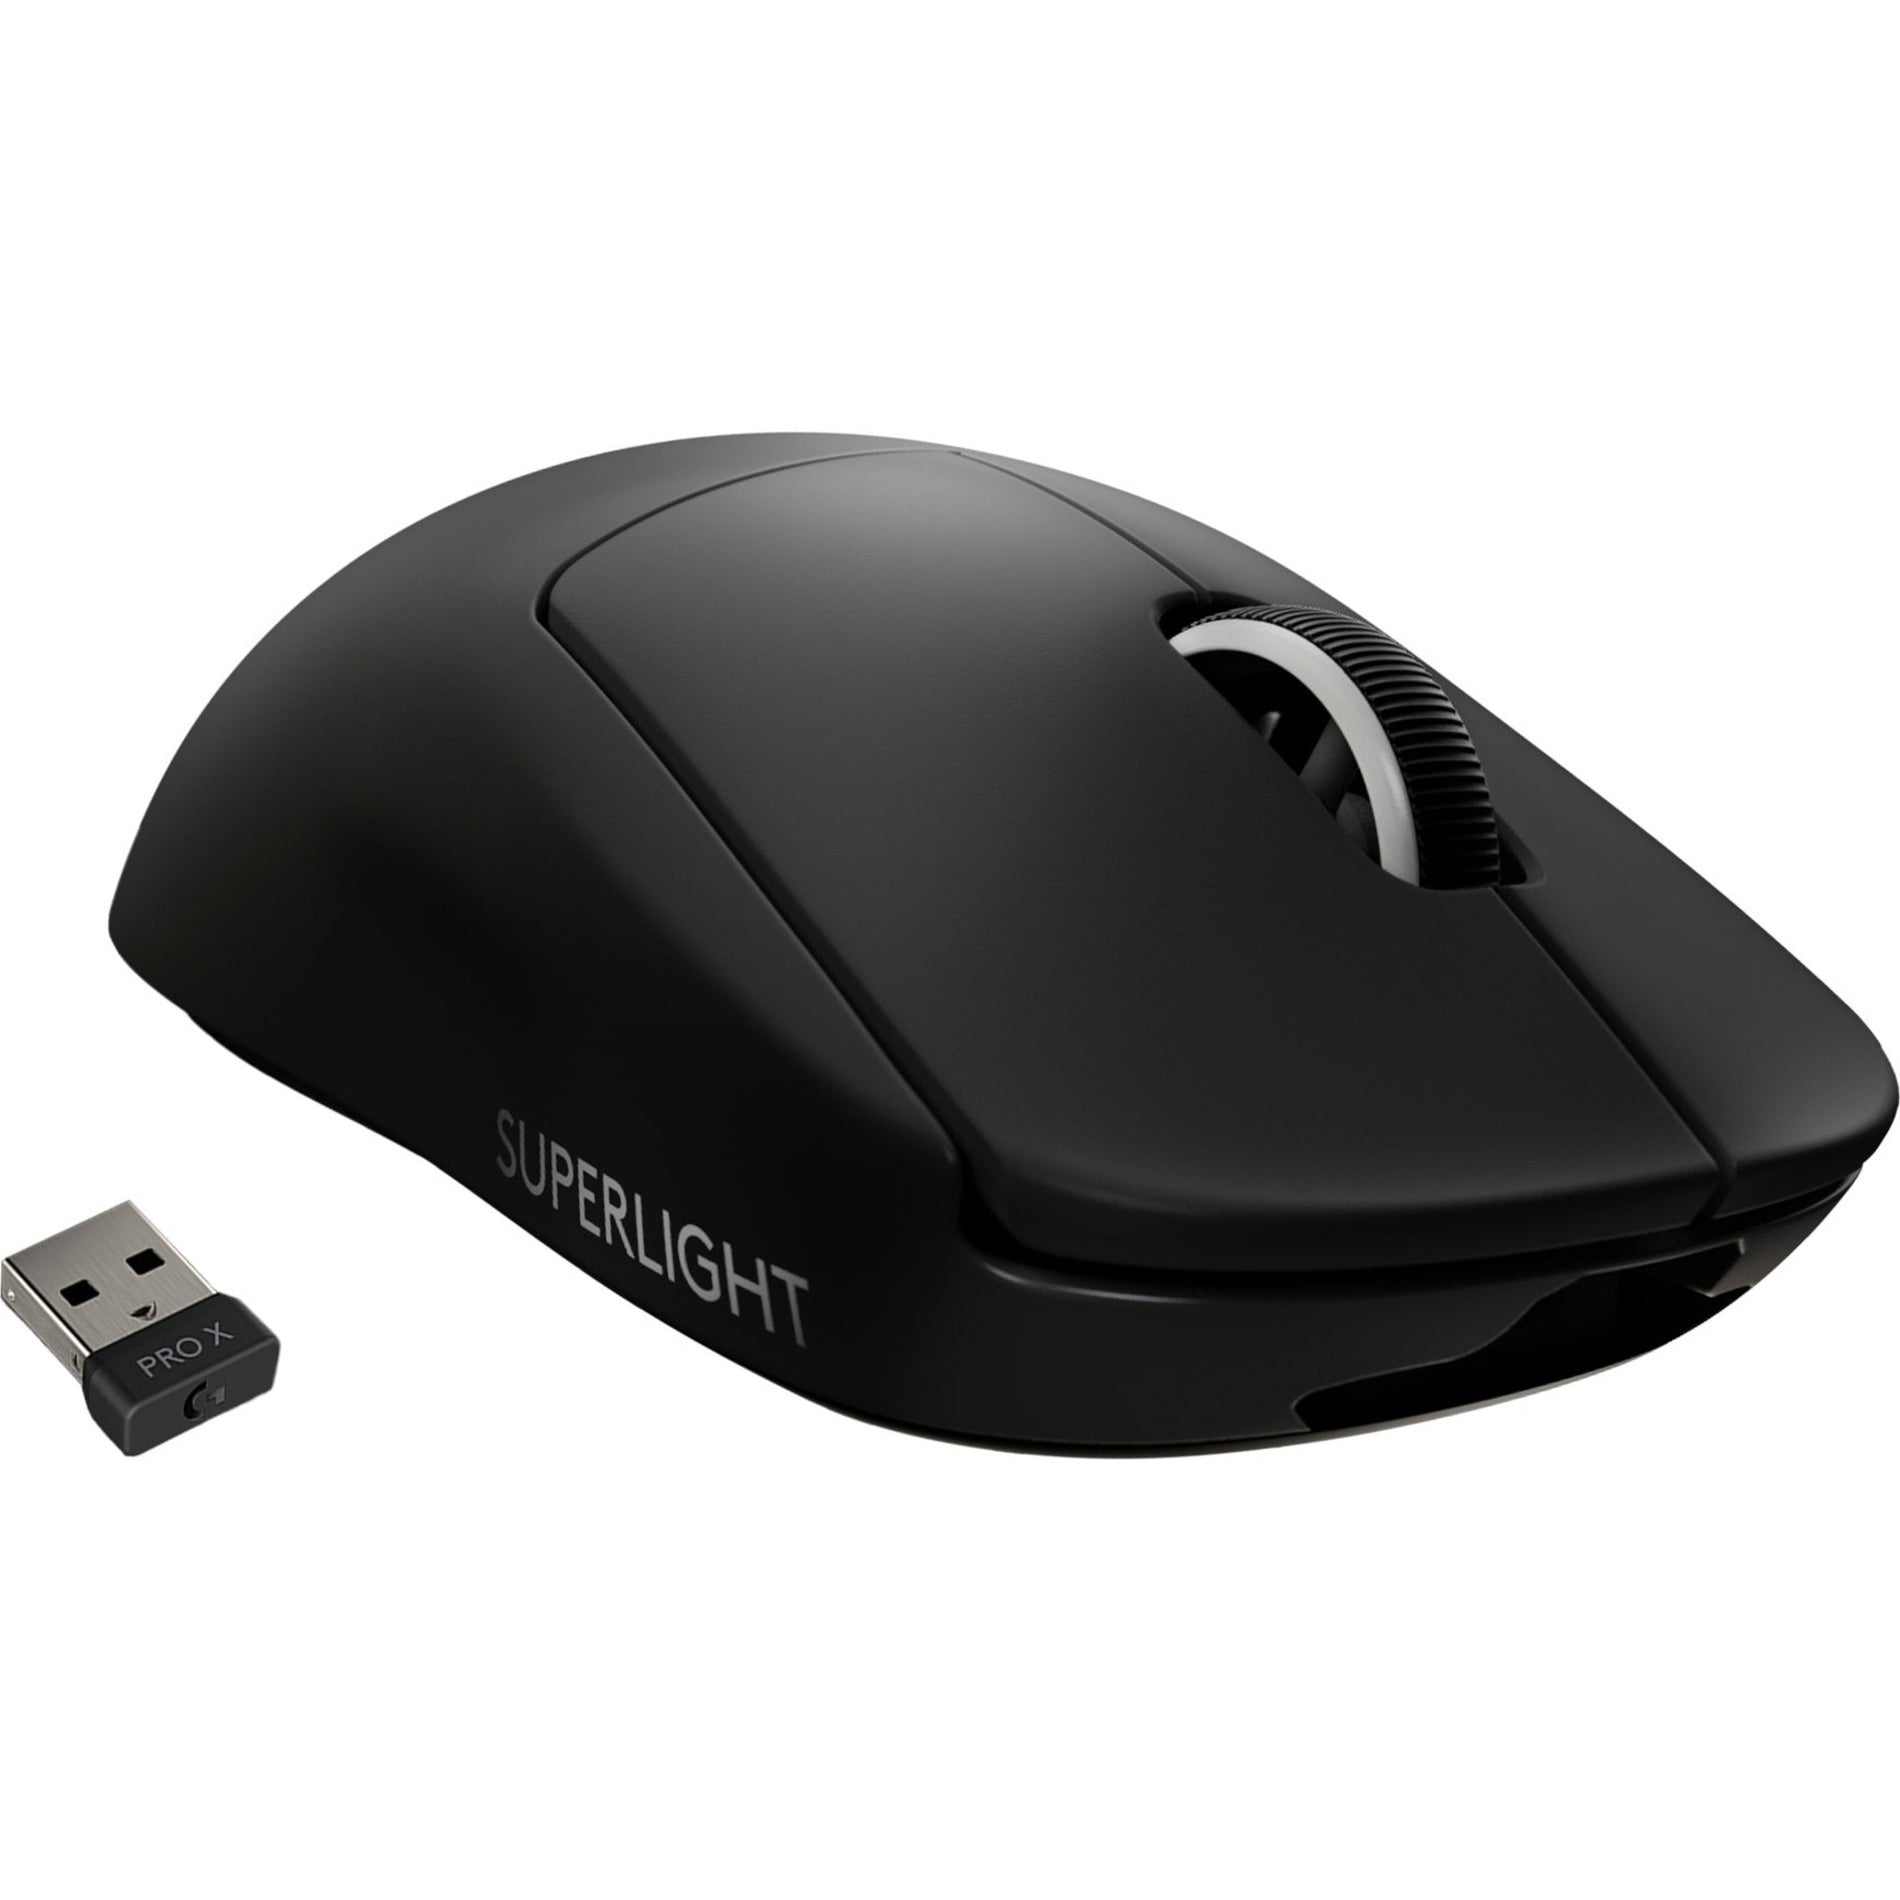 Logitech G 910-005878 Pro X Superlight Wireless Gaming Mouse, Lightweight and Responsive for PC and Mac Gaming